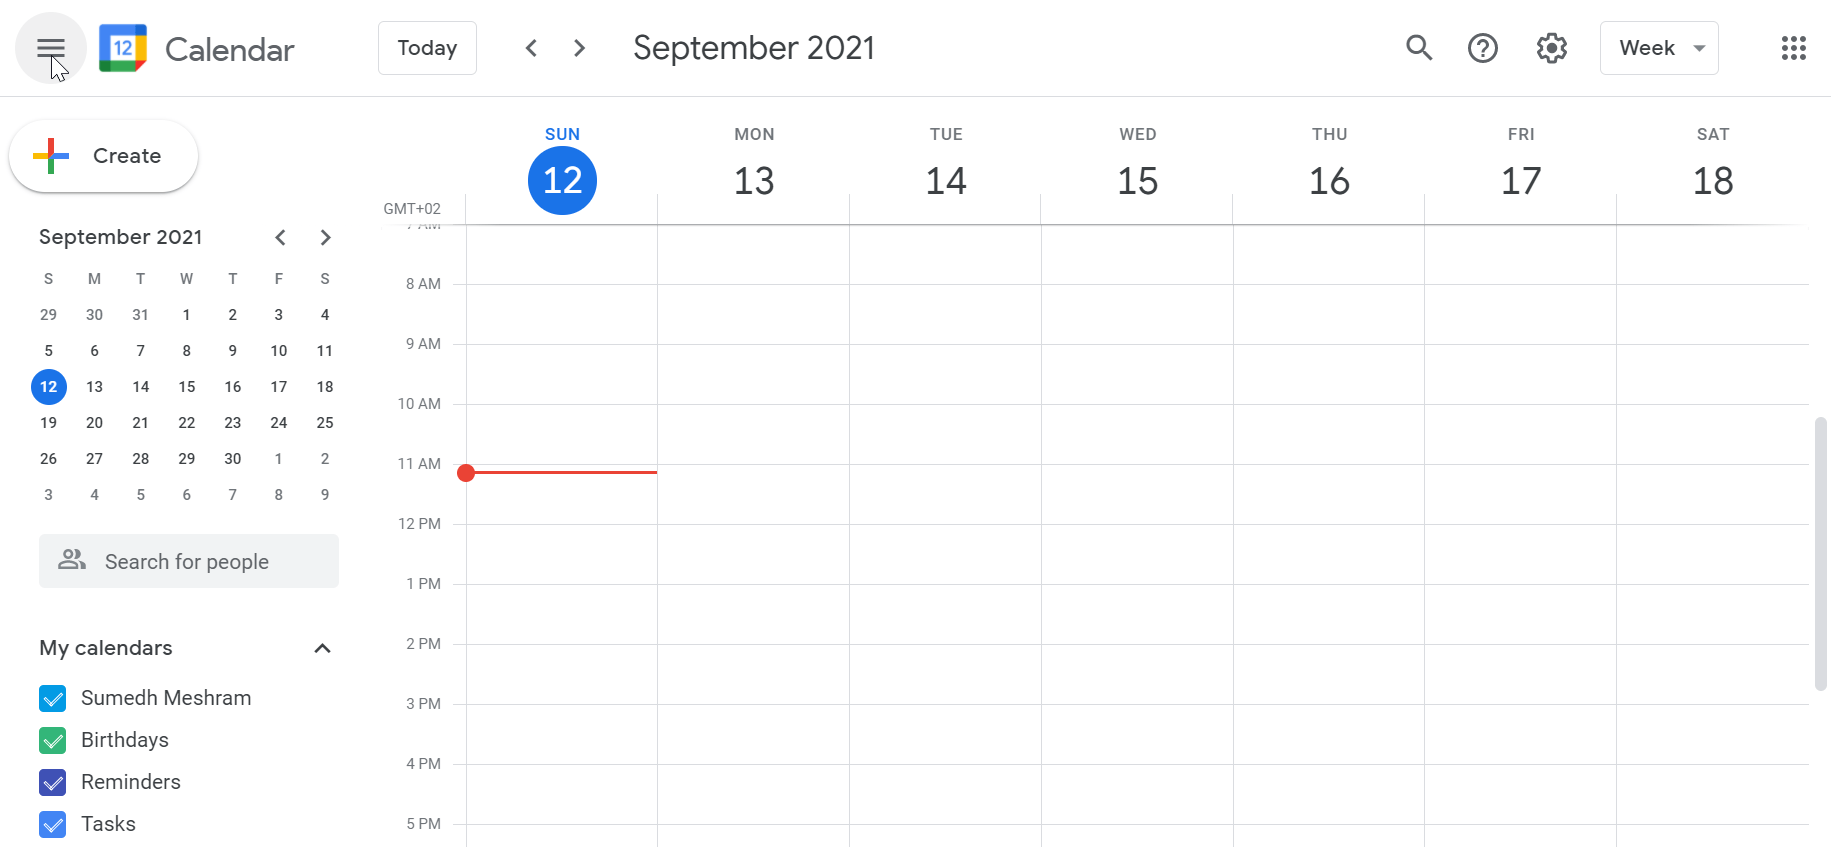 The Ultimate Guide to Google Calendar 2021